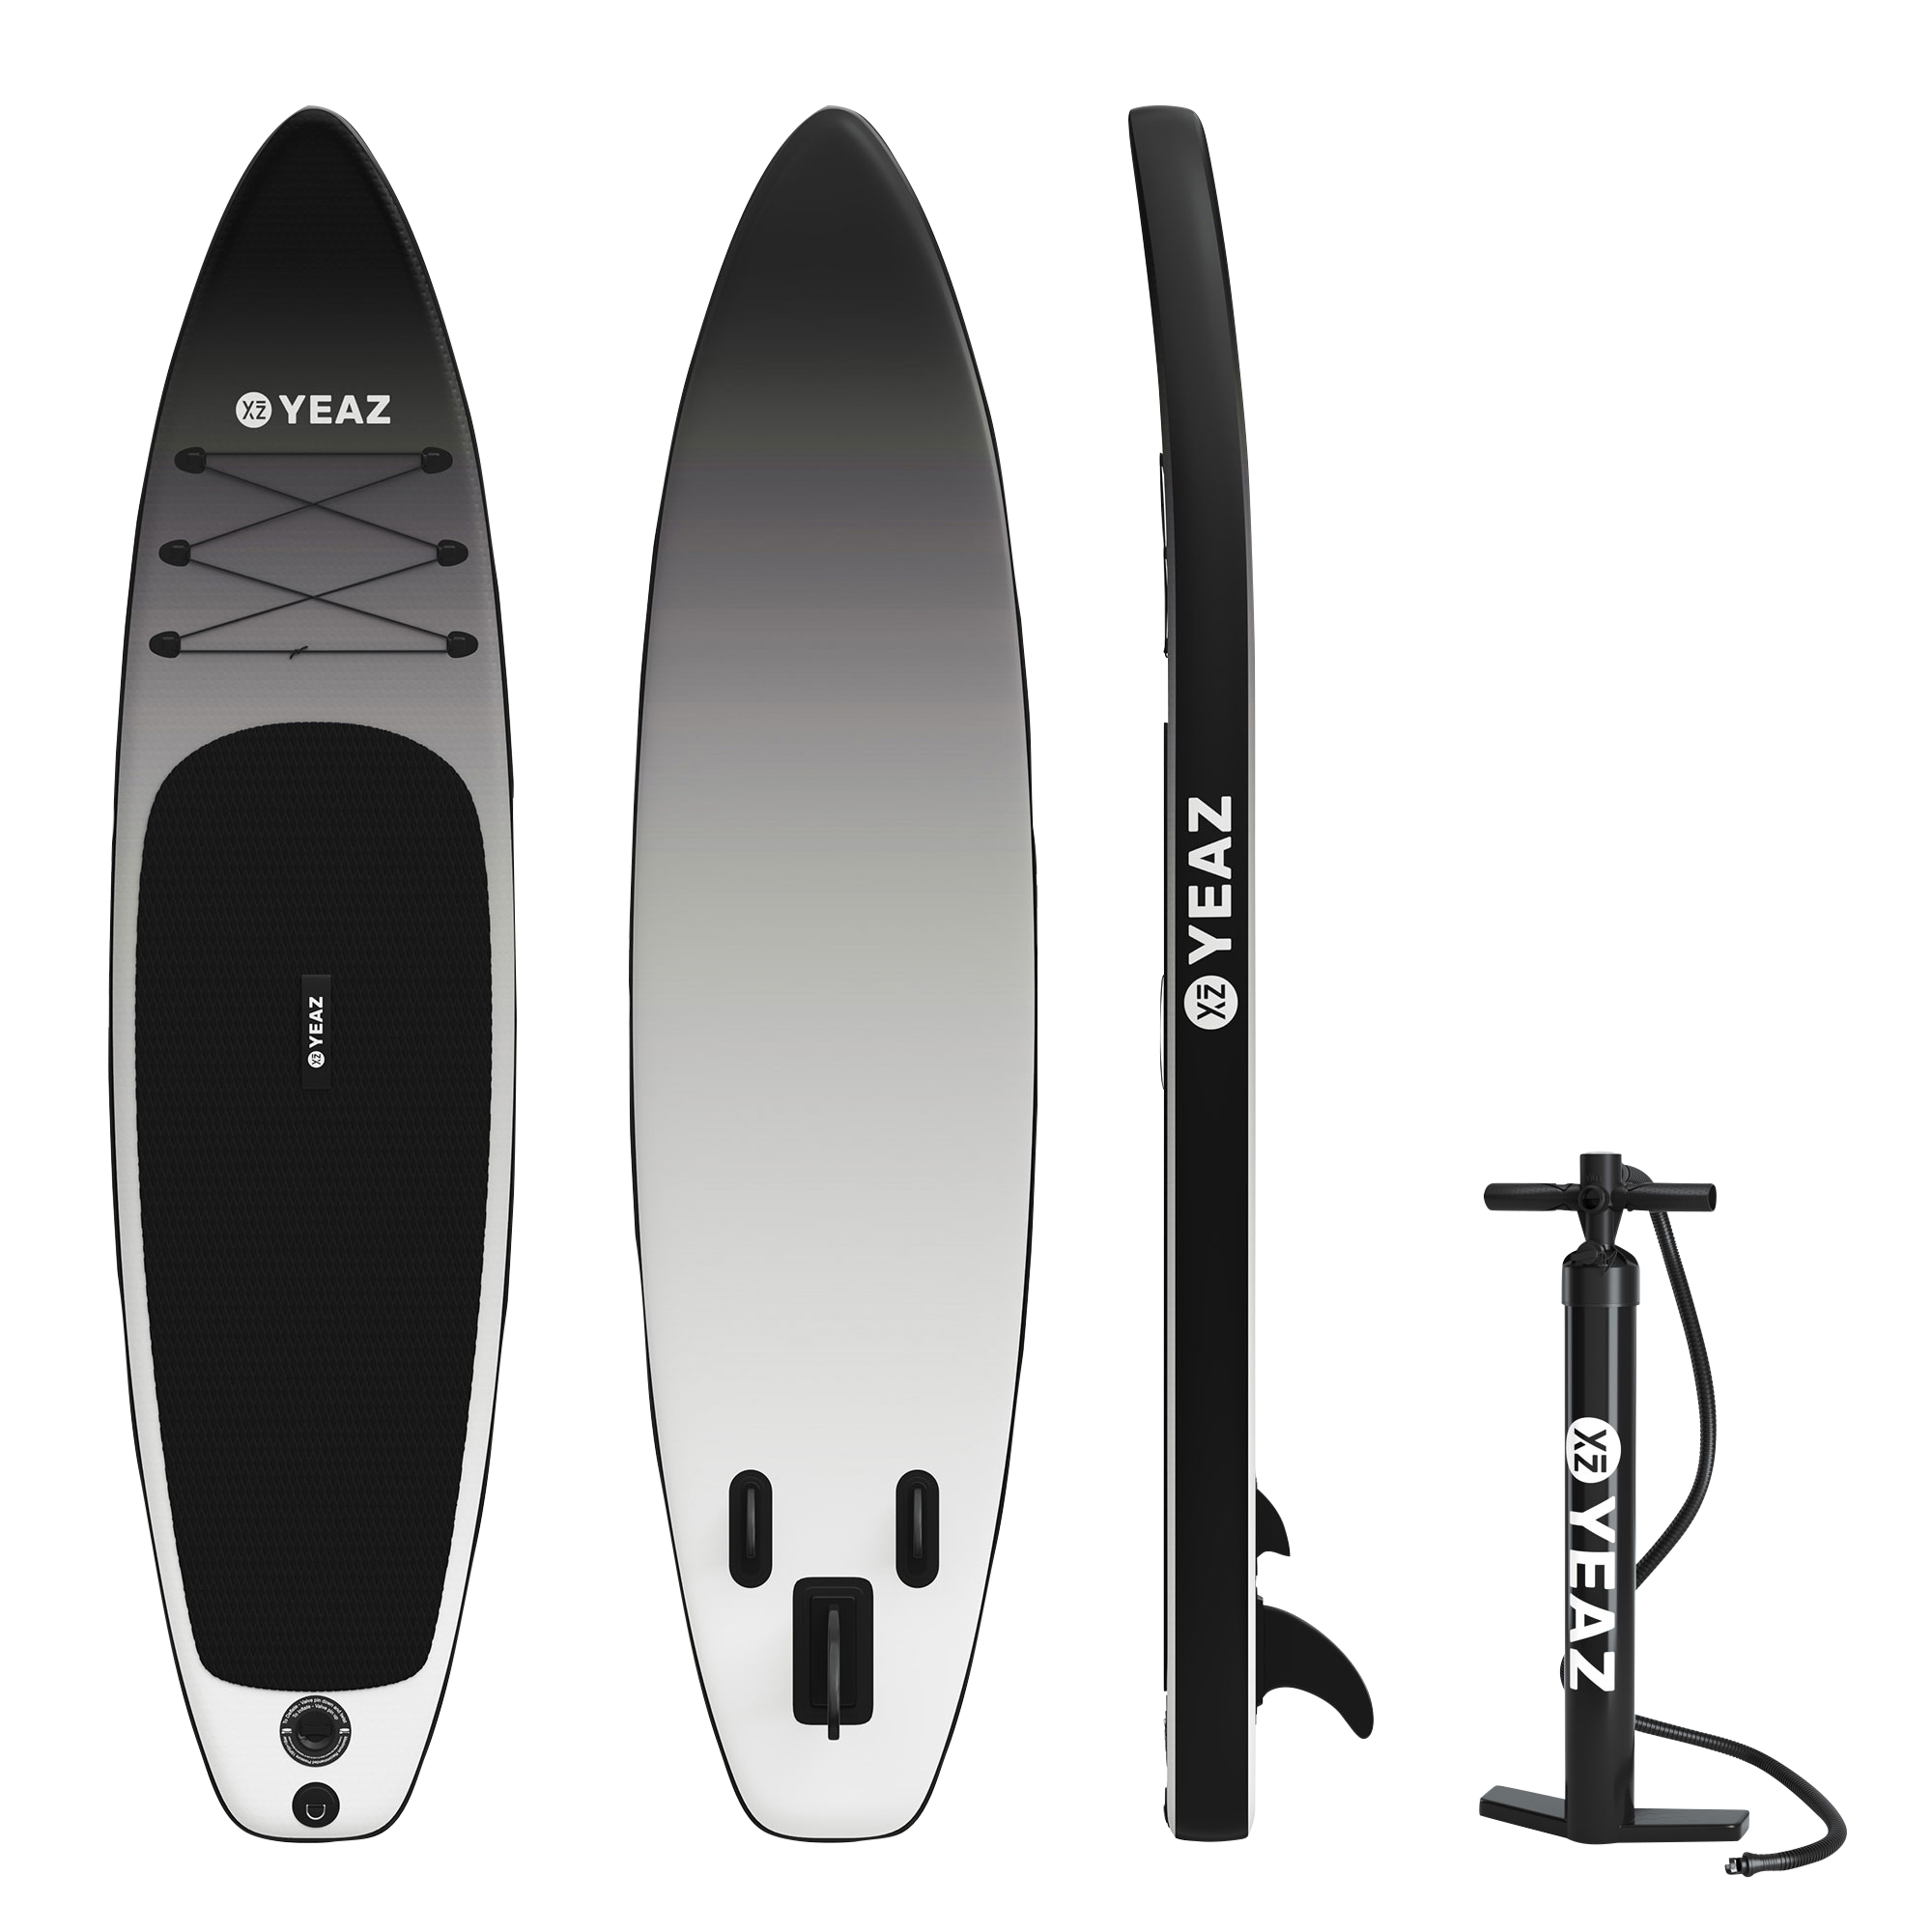 EXOTRACE shadow YEAZ - BEACH evening - SUP, SANDS BLACK